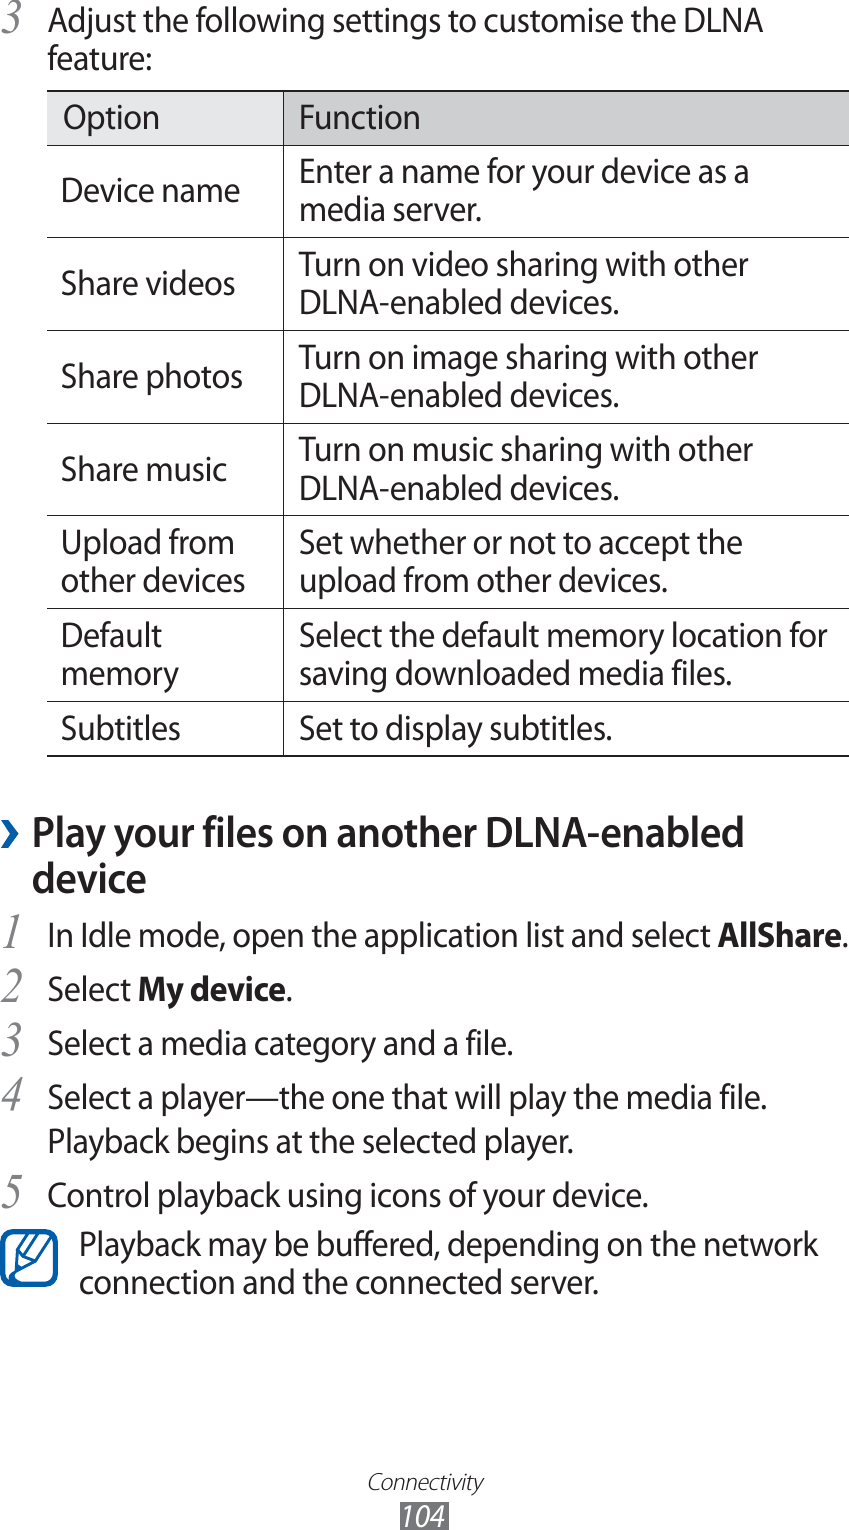 Connectivity104Adjust the following settings to customise the DLNA 3 feature:Option FunctionDevice name Enter a name for your device as a media server.Share videos Turn on video sharing with other DLNA-enabled devices.Share photos Turn on image sharing with other DLNA-enabled devices.Share music Turn on music sharing with other DLNA-enabled devices.Upload from other devicesSet whether or not to accept the upload from other devices.Default memorySelect the default memory location for saving downloaded media files.Subtitles Set to display subtitles.Play your files on another DLNA-enabled  ›deviceIn Idle mode, open the application list and select 1 AllShare.Select 2 My device.Select a media category and a file.3 Select a player—the one that will play the media file.4 Playback begins at the selected player.Control playback using icons of your device.5 Playback may be buffered, depending on the network connection and the connected server.